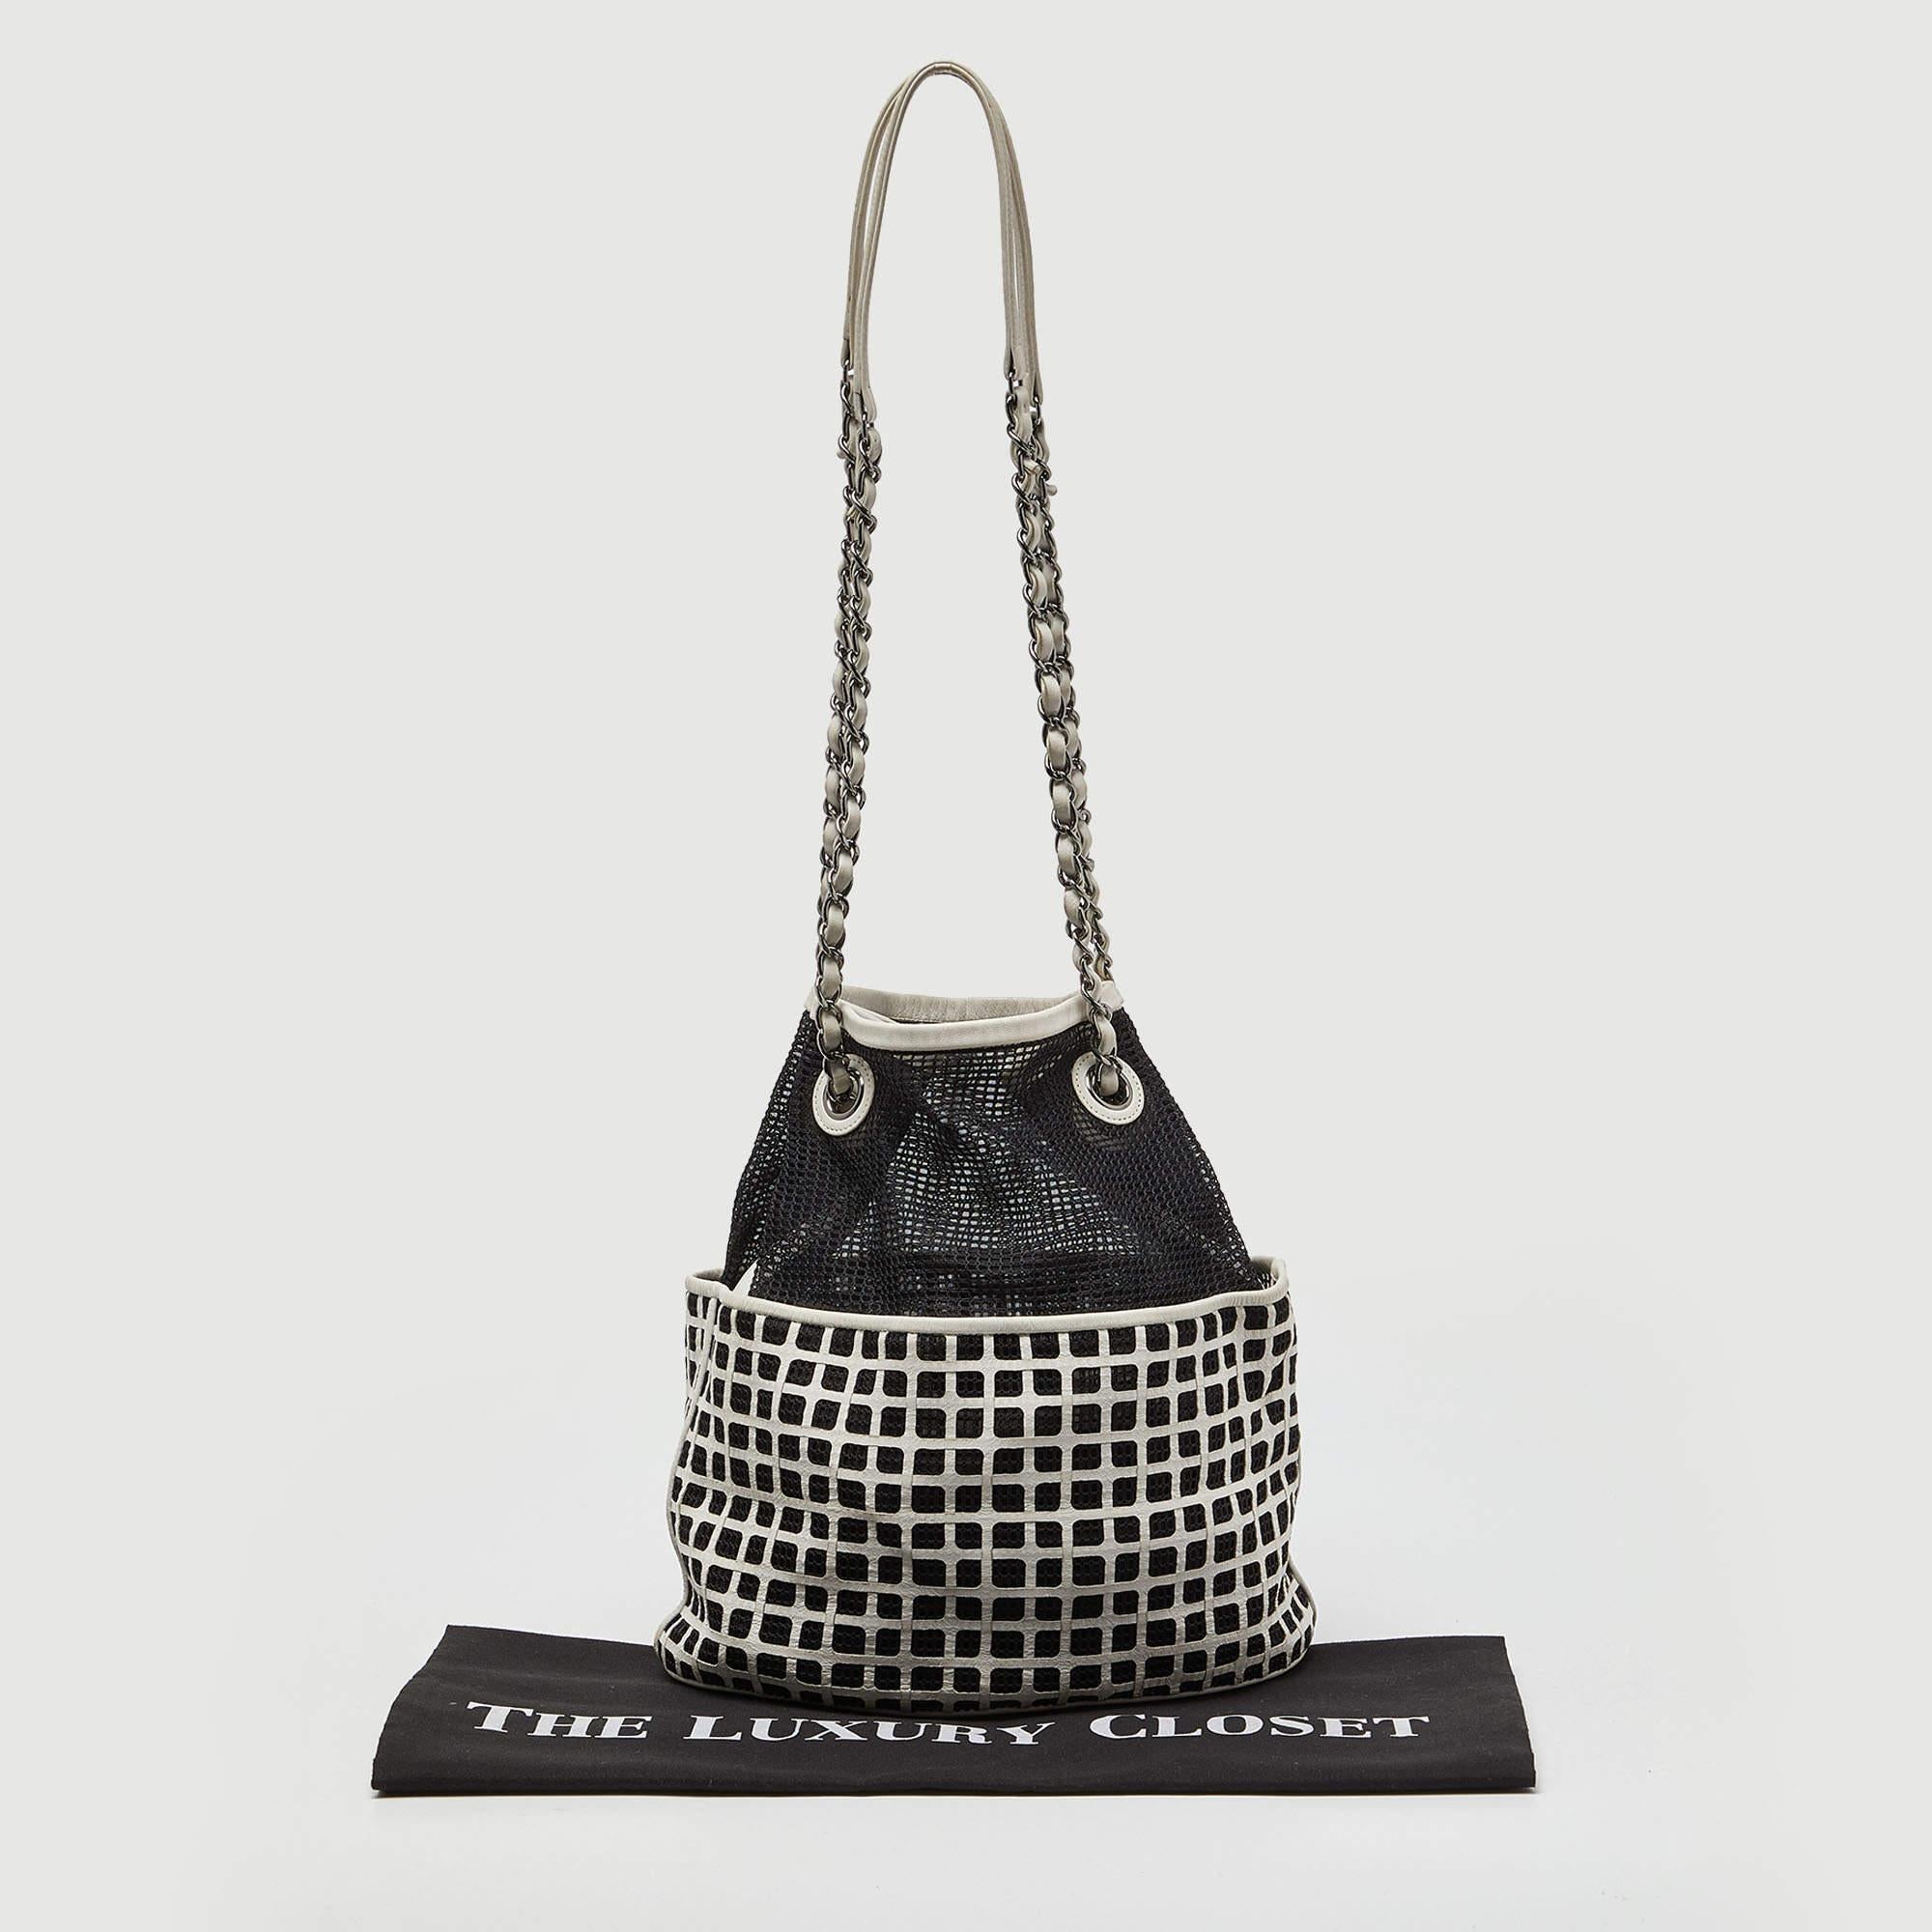 Chanel Black/White Mesh and Leather Bucket Bag For Sale 3